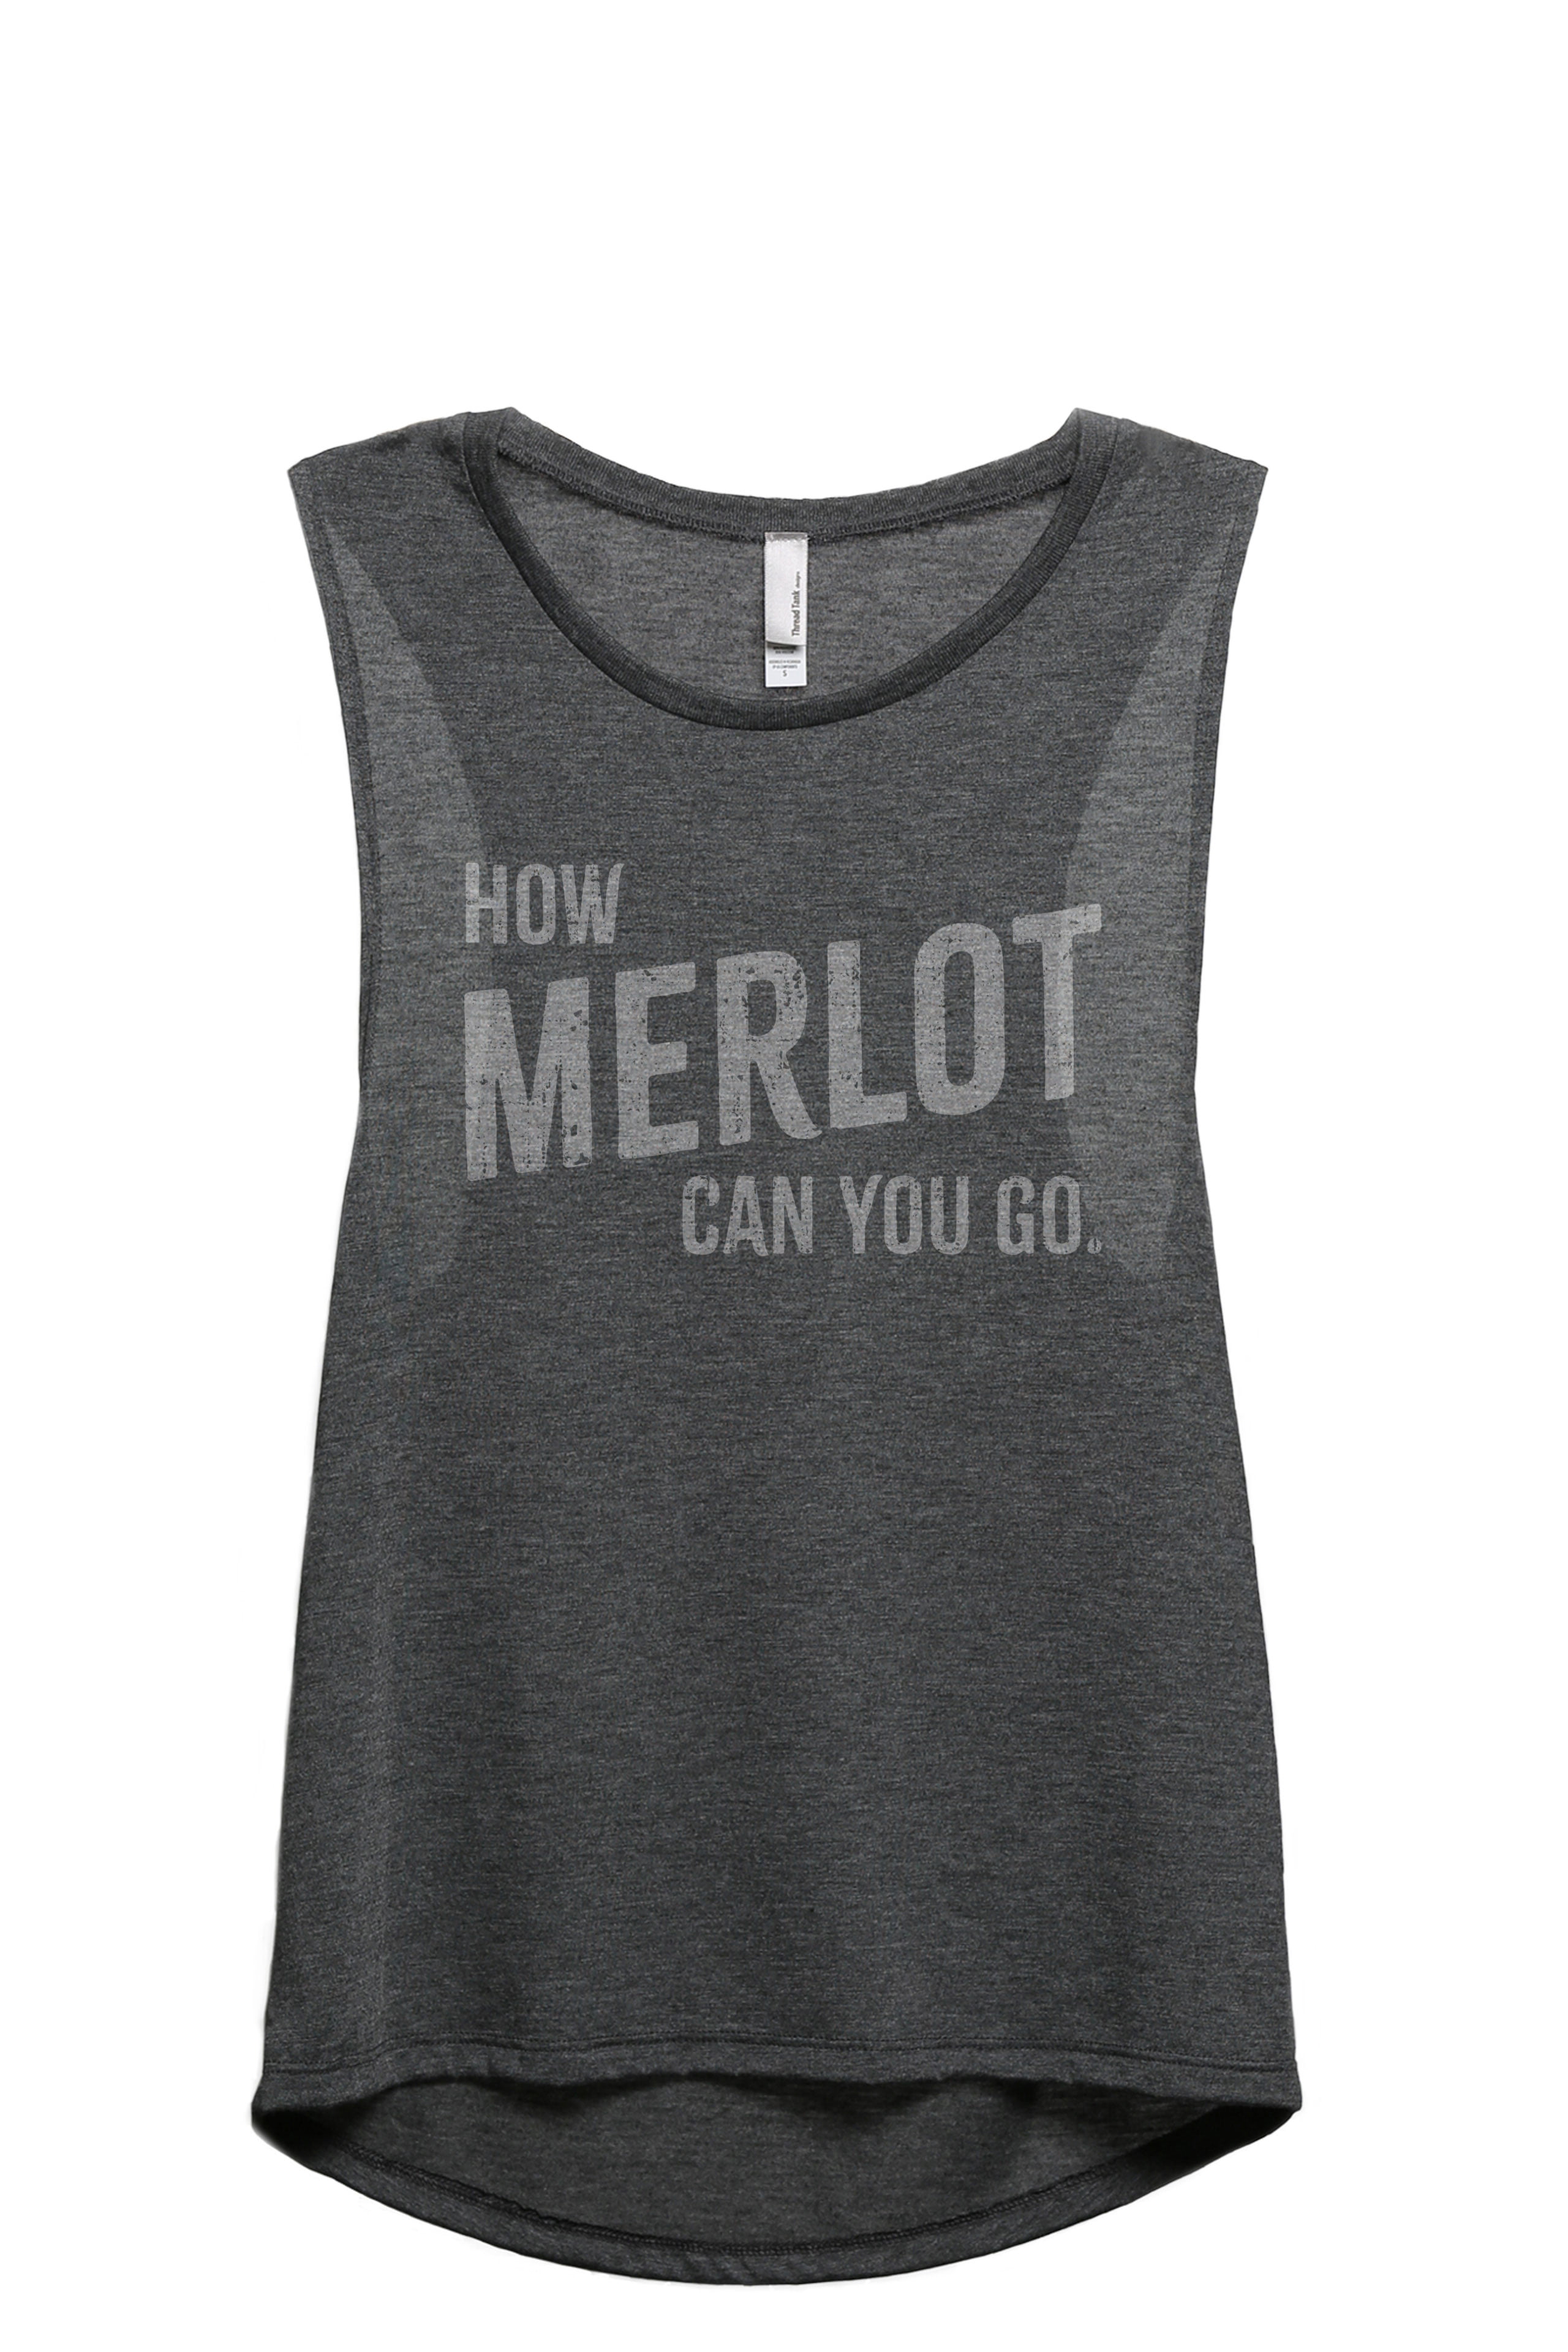 How Merlot Can You Go Women's Fashion Sleeveless Muscle Workout Yoga Tank  Top Charcoal Grey Small 